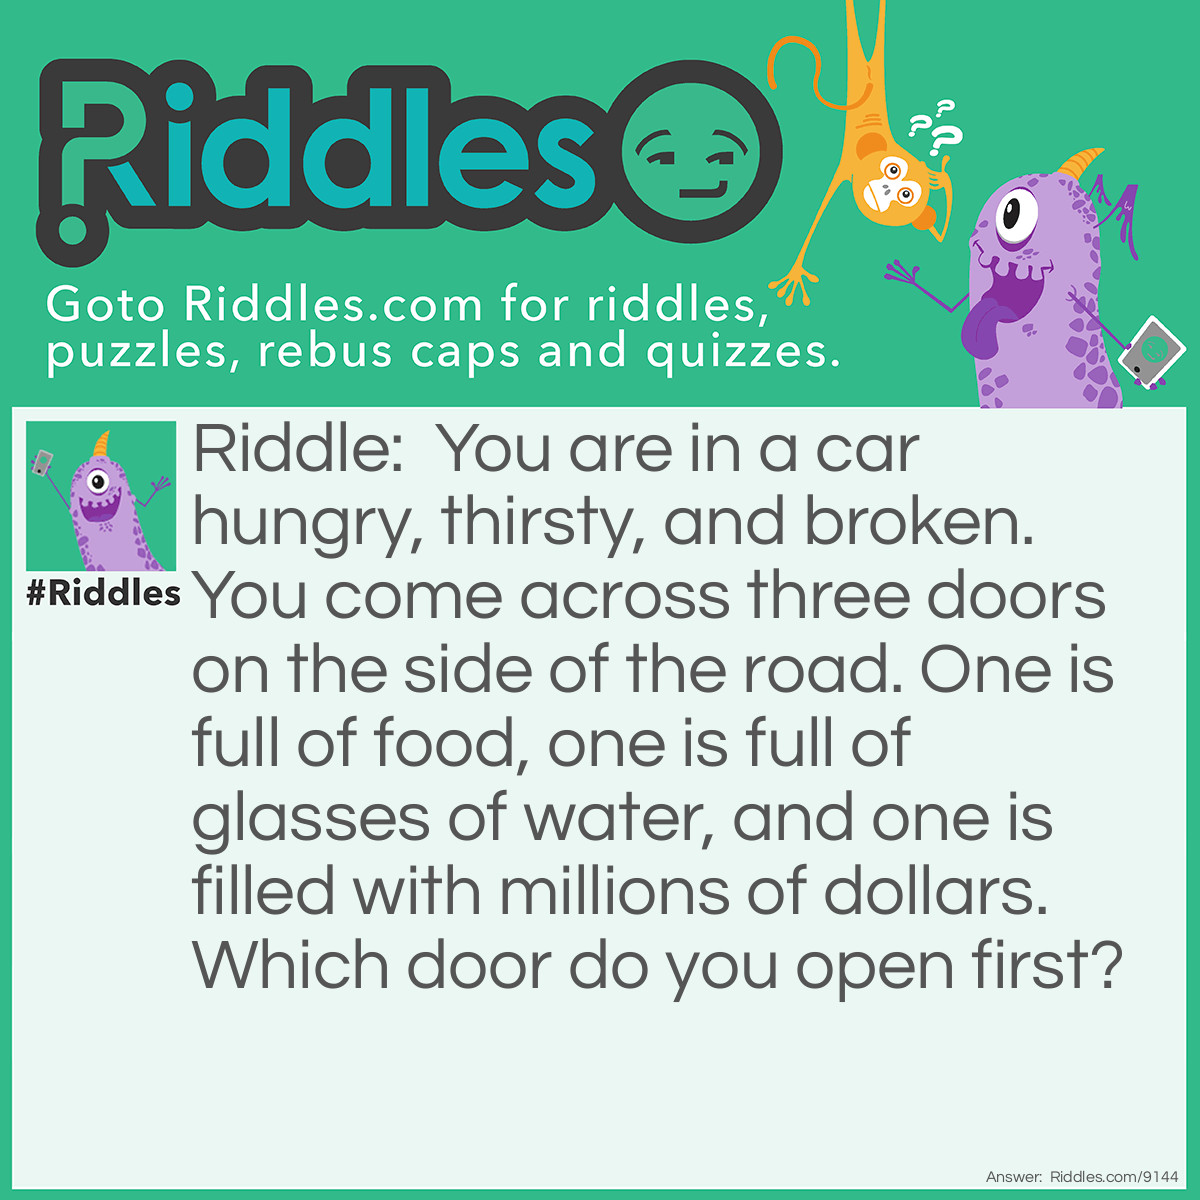 Riddle: You are in a car hungry, thirsty, and broken. You come across three doors on the side of the road. One is full of food, one is full of glasses of water, and one is filled with millions of dollars. Which door do you open first? Answer: Your car door.